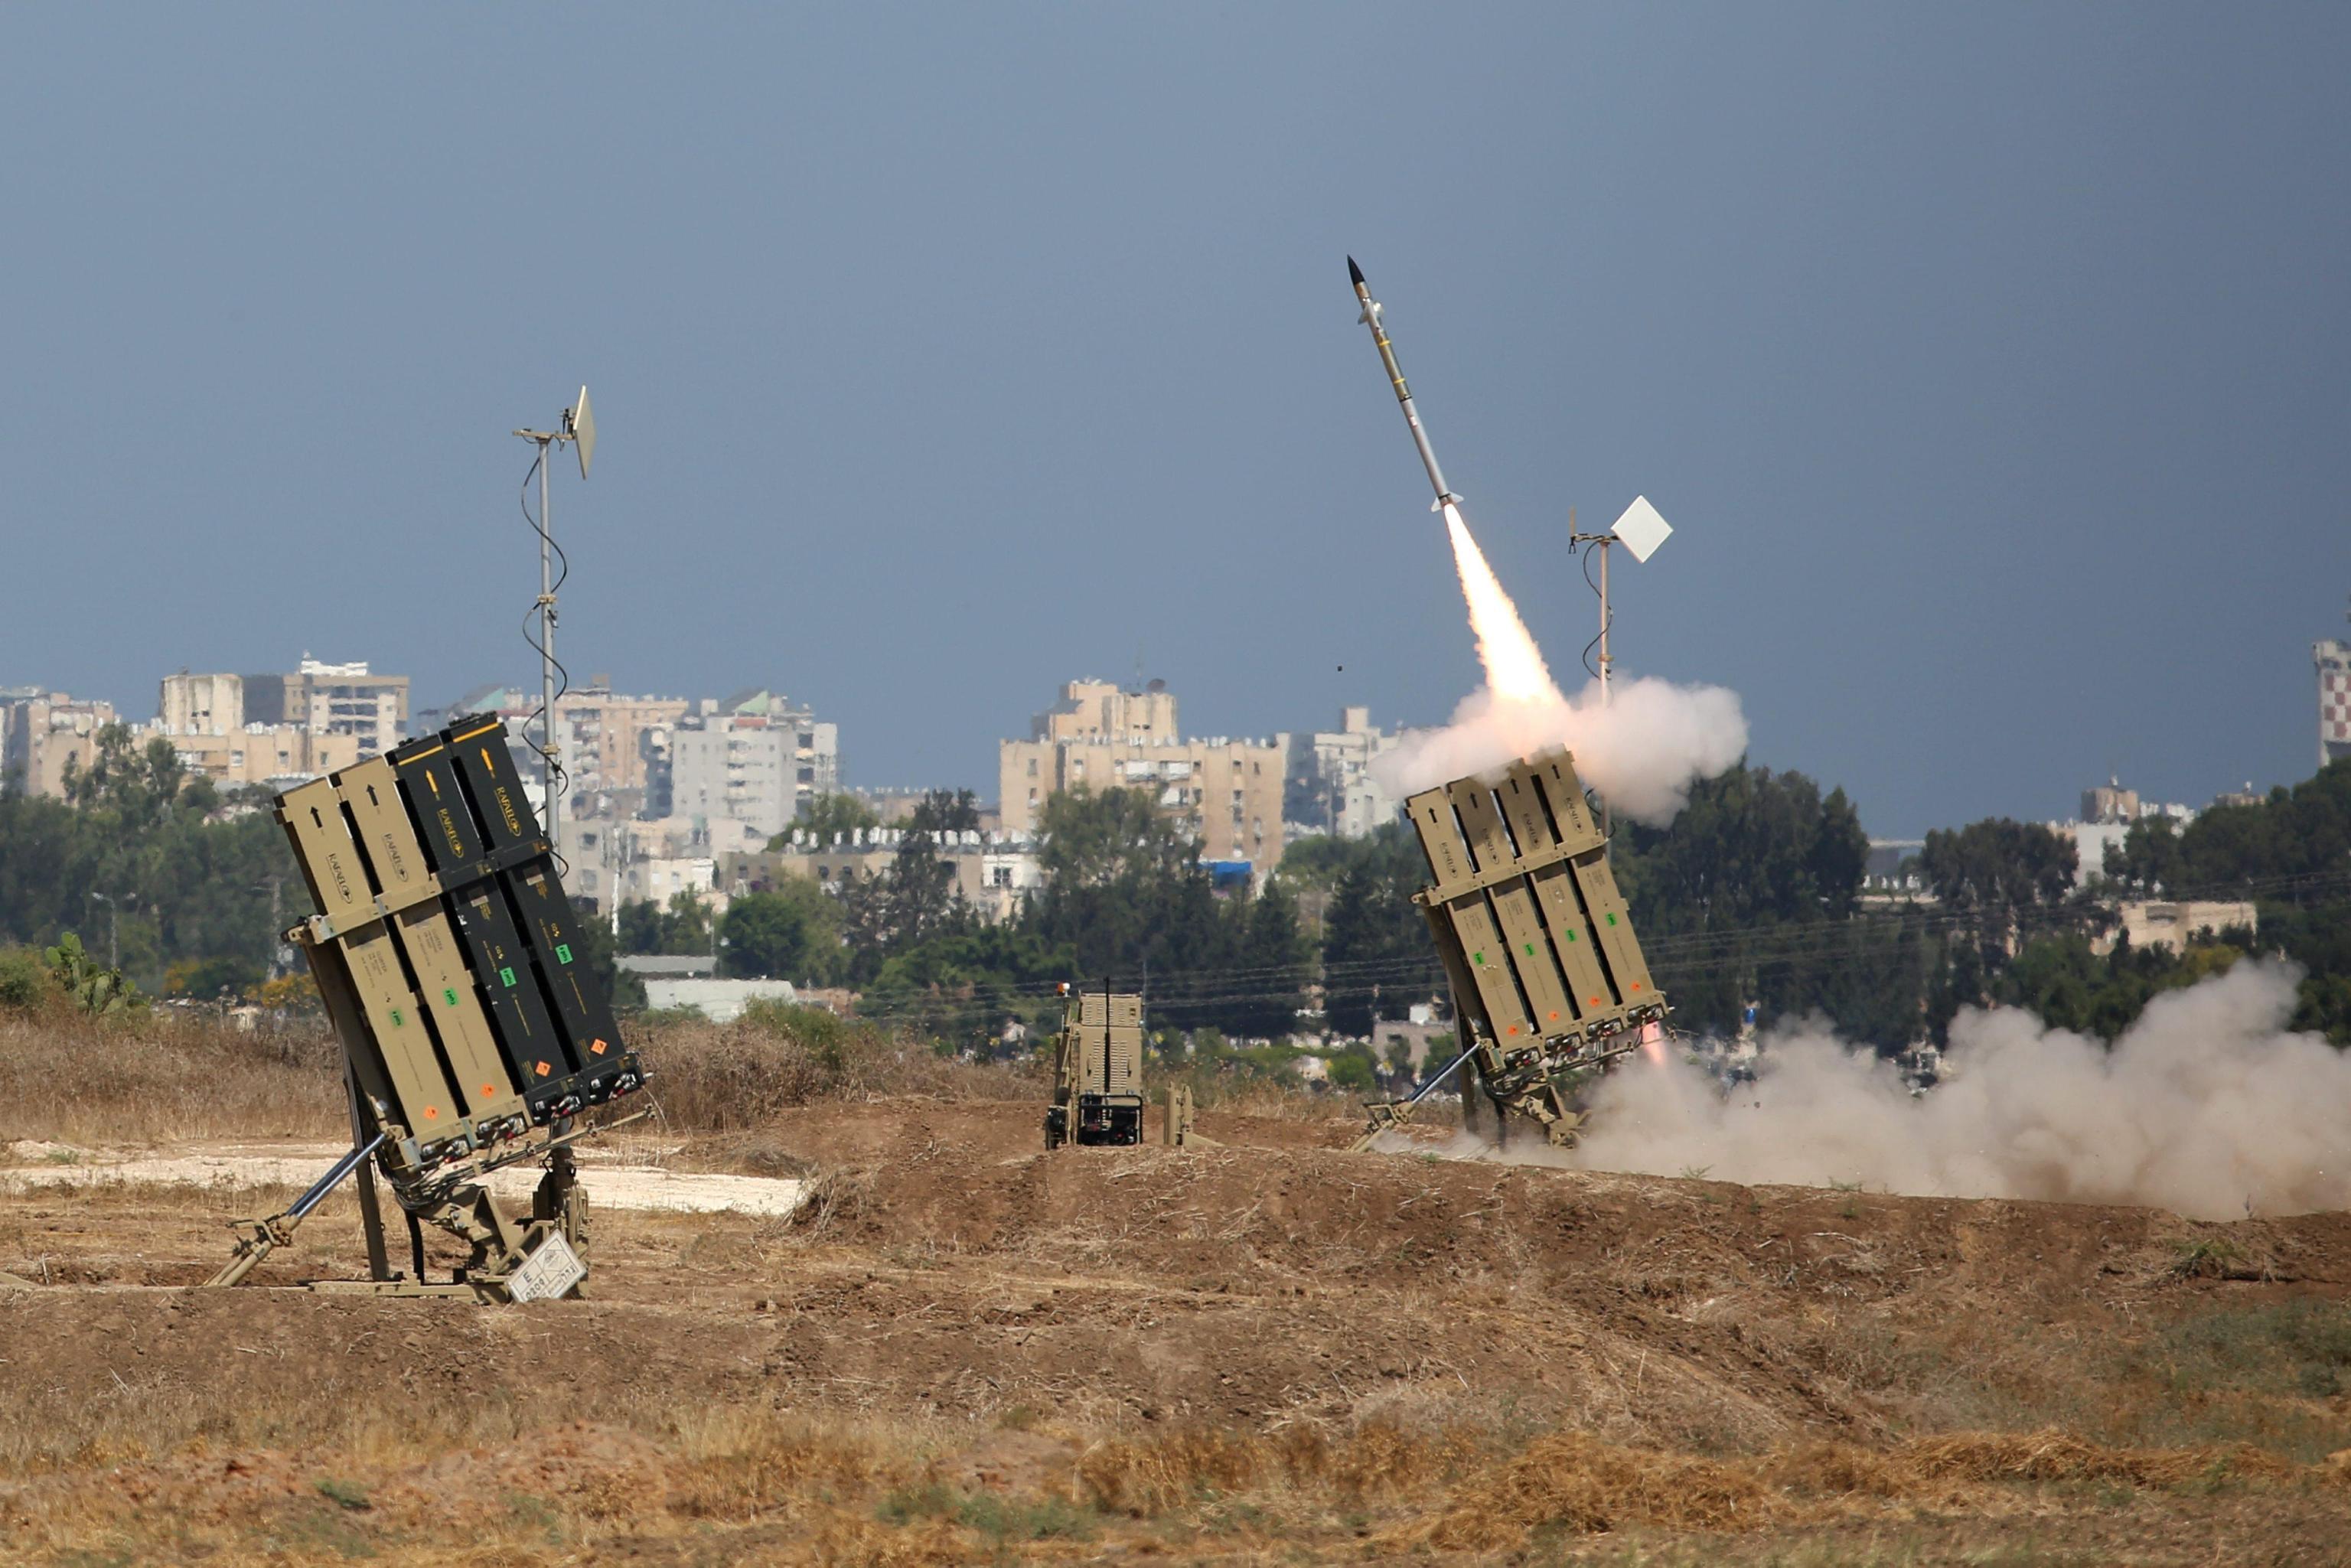 An Israeli Iron Dome defense system missile is fired to intercept a rocket fired from Gaza over the city of Ashdod, southern Israel, 08 July 2014. Israel launched a major military offensive against the Gaza Strip early 08 July 2014 in response to increasing rocket attacks by Palestinian militants. The Israel Air Force bombed about 50 targets overnight, military spokesman Peter Lerner said. He warned that Israel would gradually increase the "quantity and quality" of its targets, stepping up pressure. ANSA/ABIR SULTAN